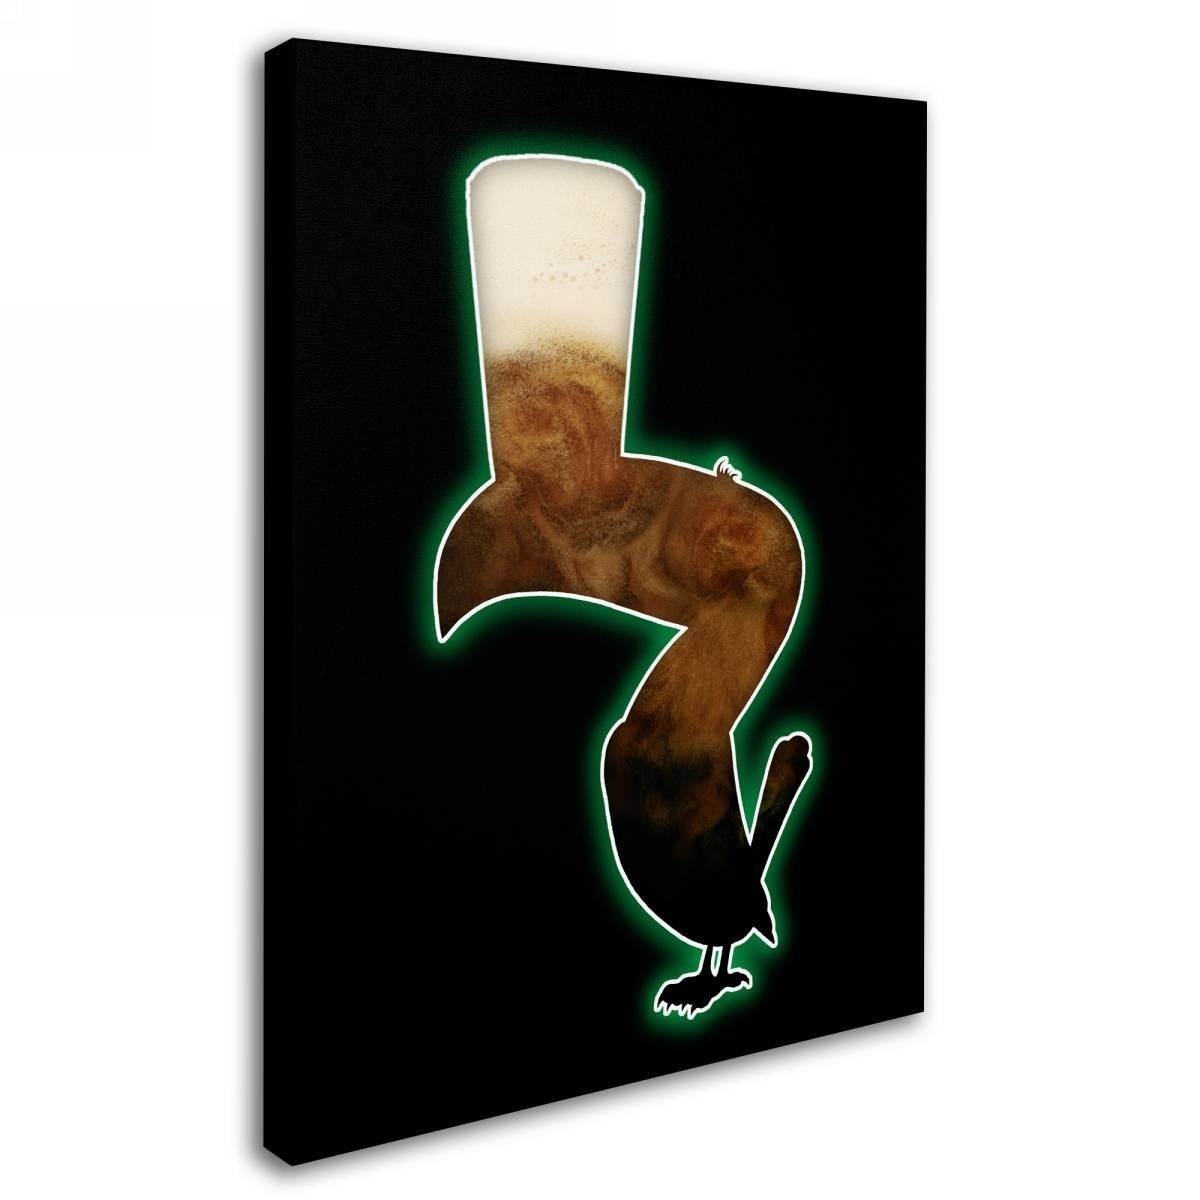 A Guinness Brewery 'Guinness X' canvas art on a black background.